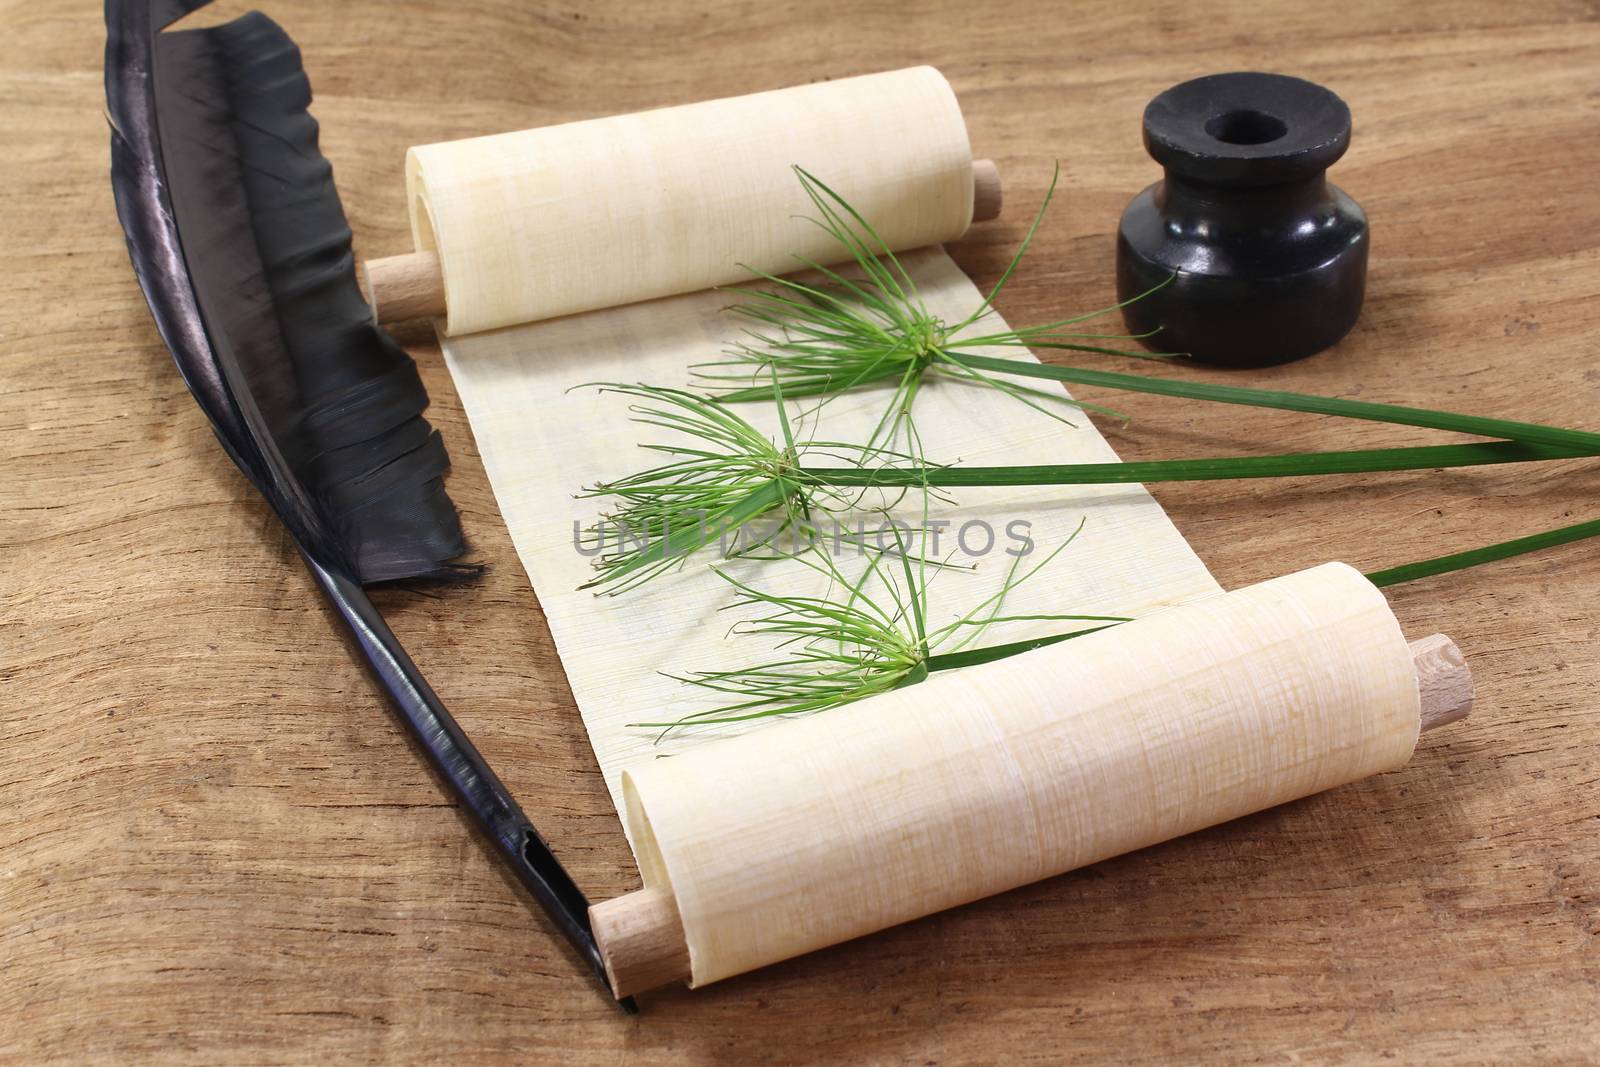 Papyrus scroll with plant, quill and inkwell